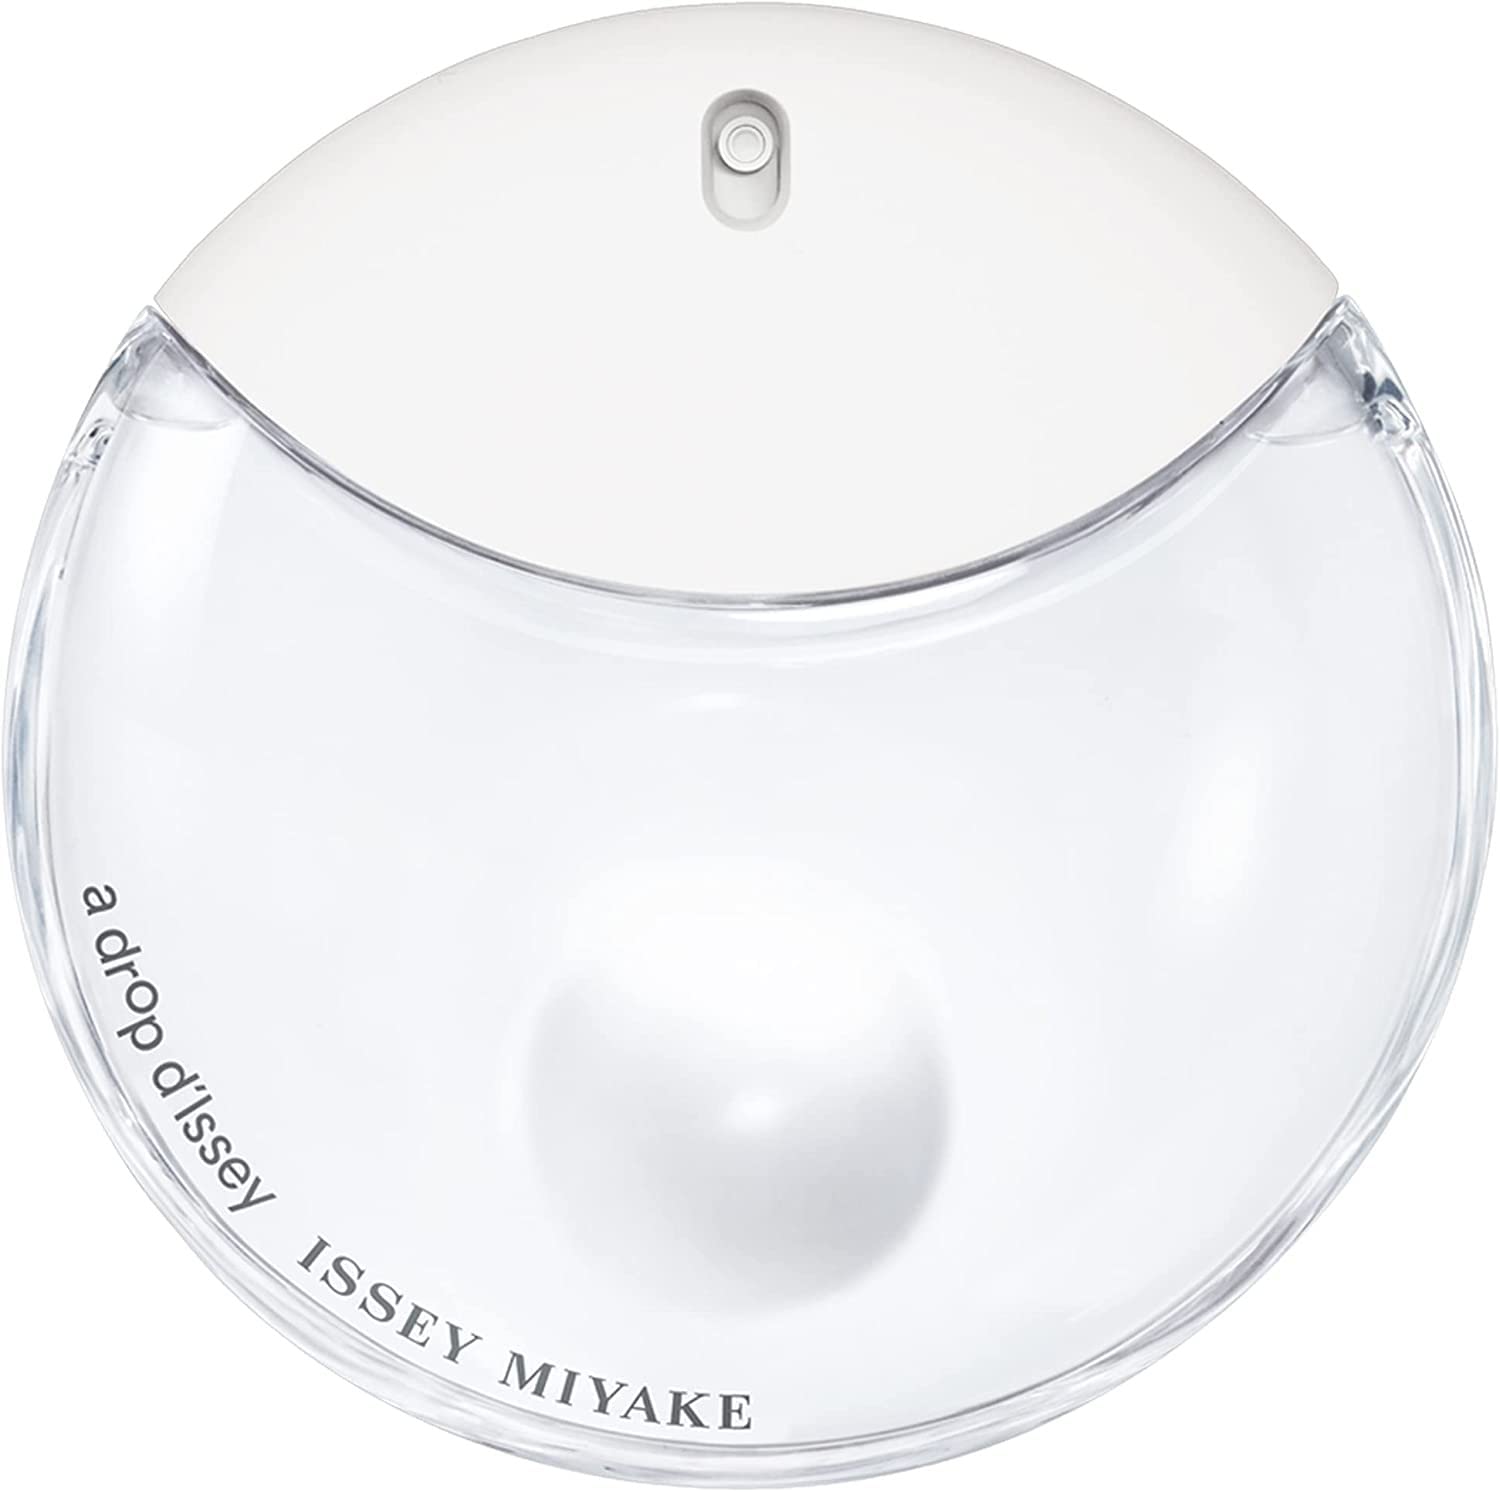 ISSEY MIYAKE A DROP D'ISSEY 3oz EDP SP (L)